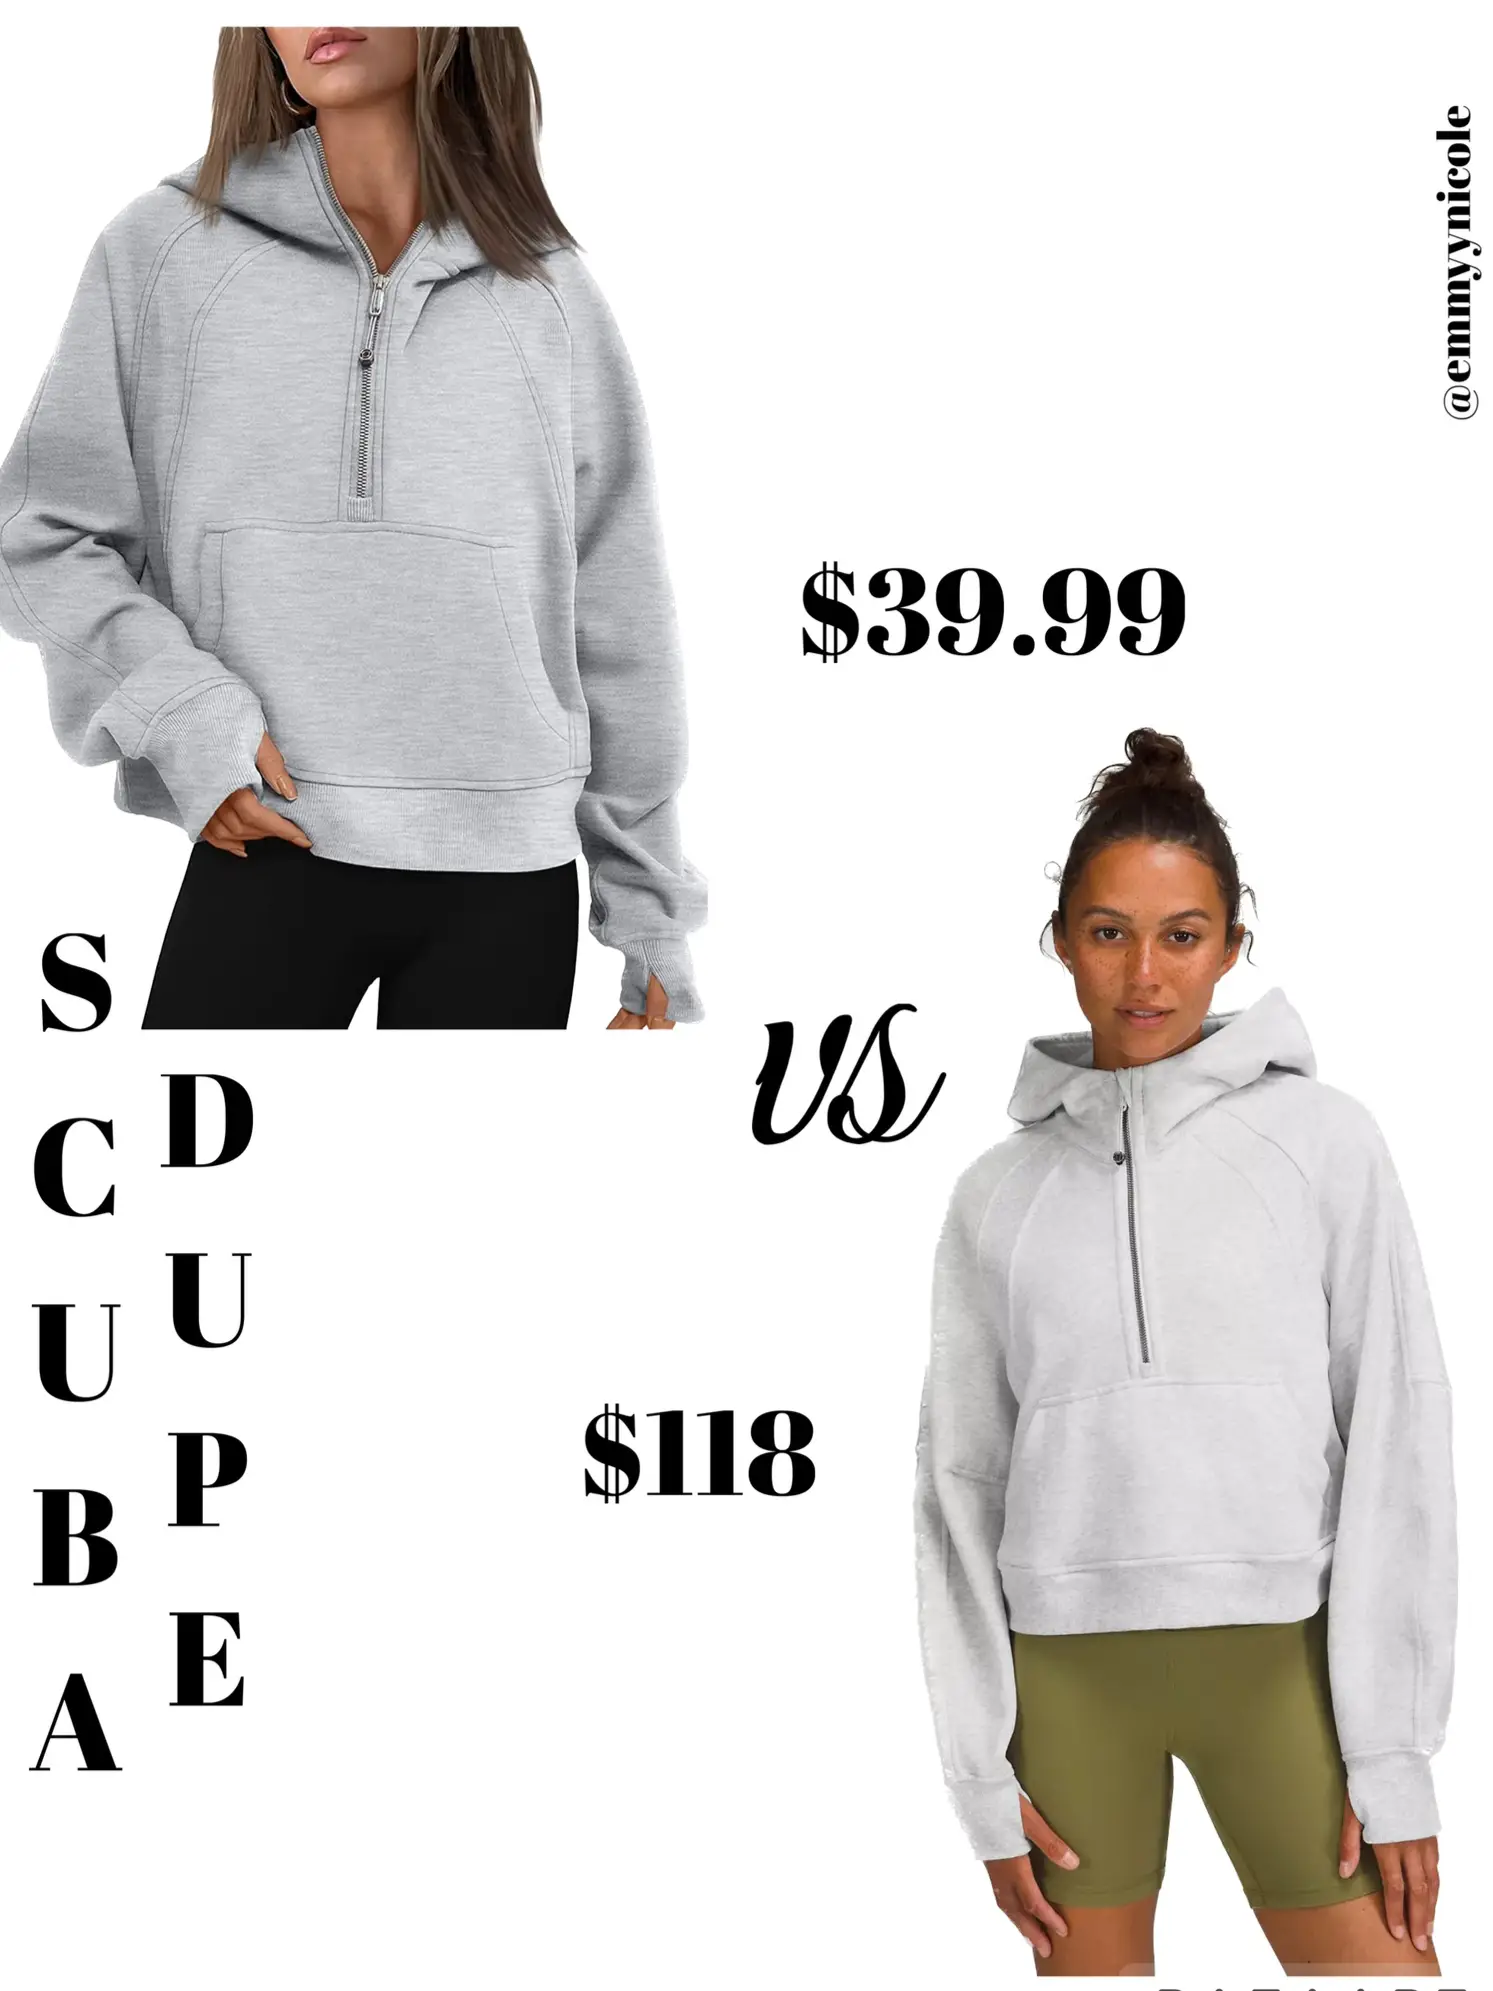 The BEST Lululemon scuba dupe I've seen going around on the